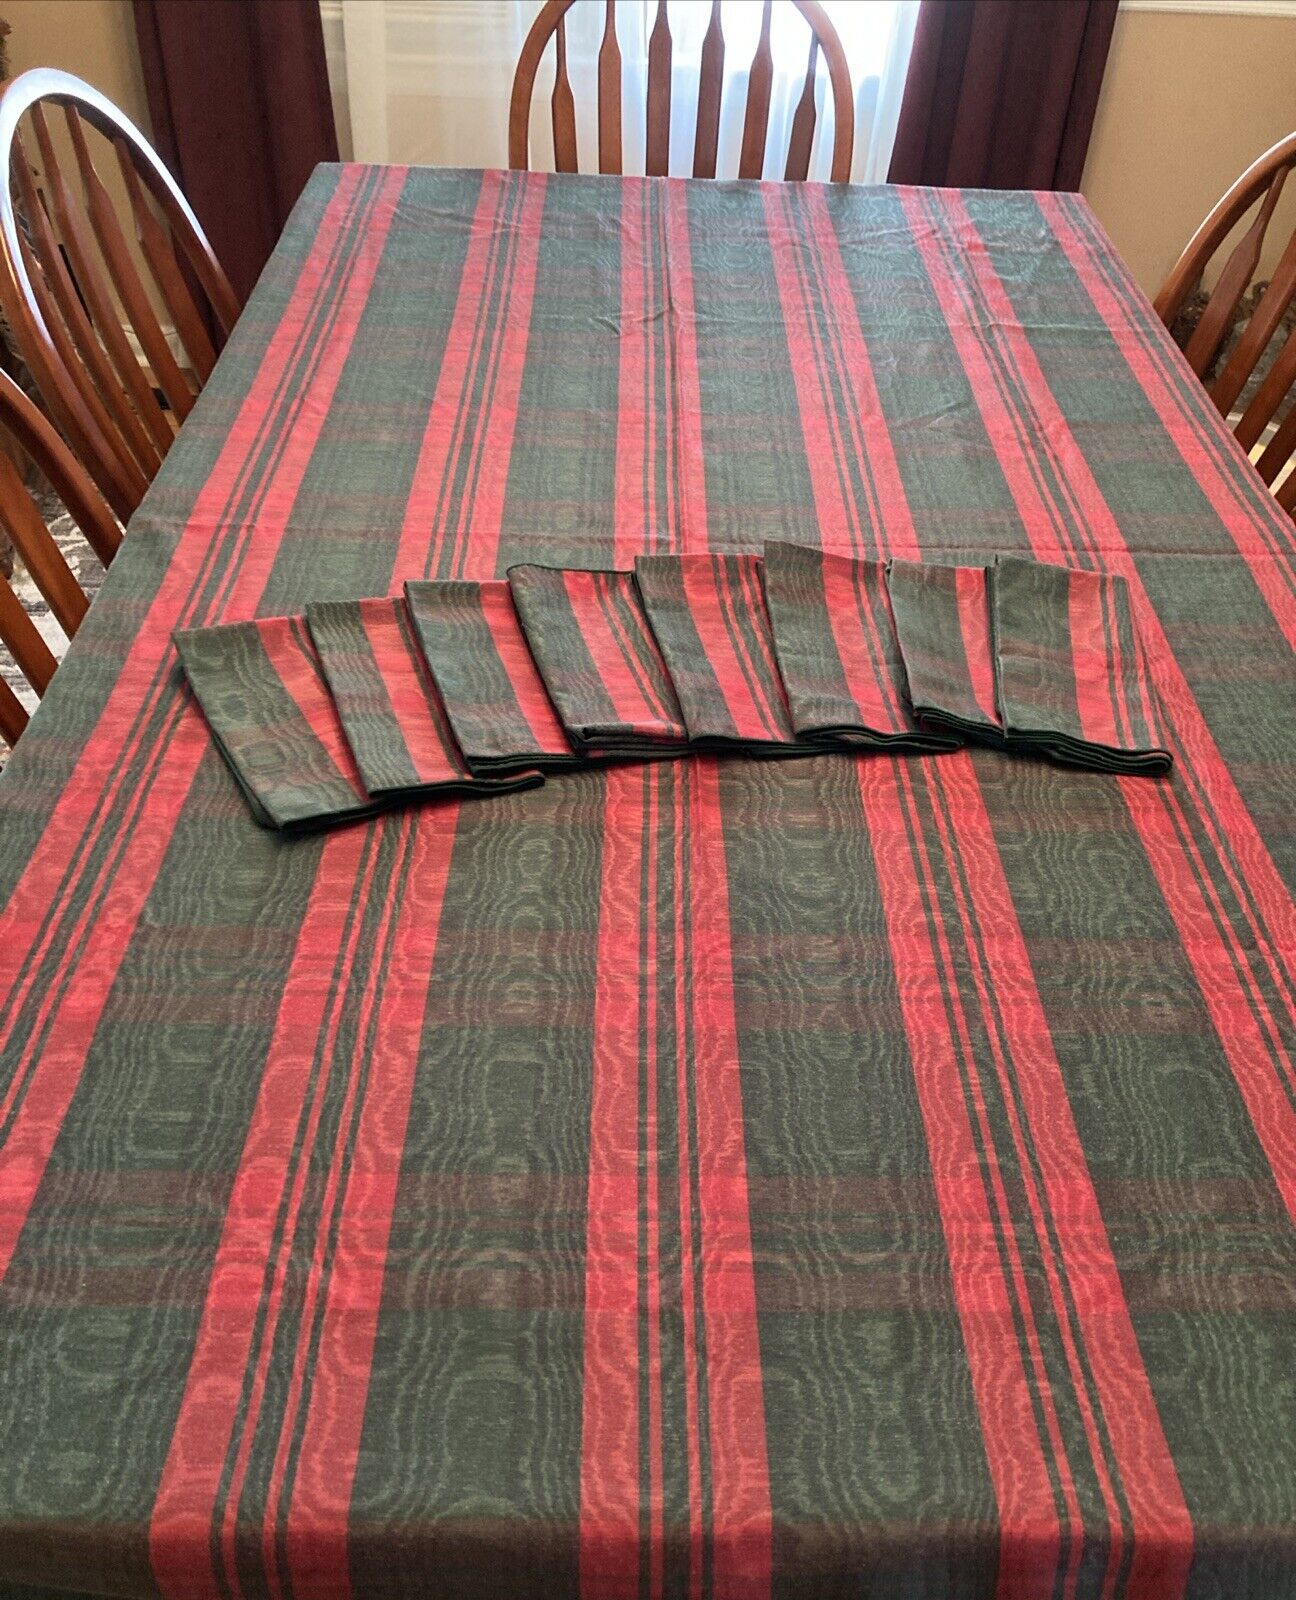 Estate Sale Beautiful Red And Green Striped With 8 Matching Napkins So Pretty